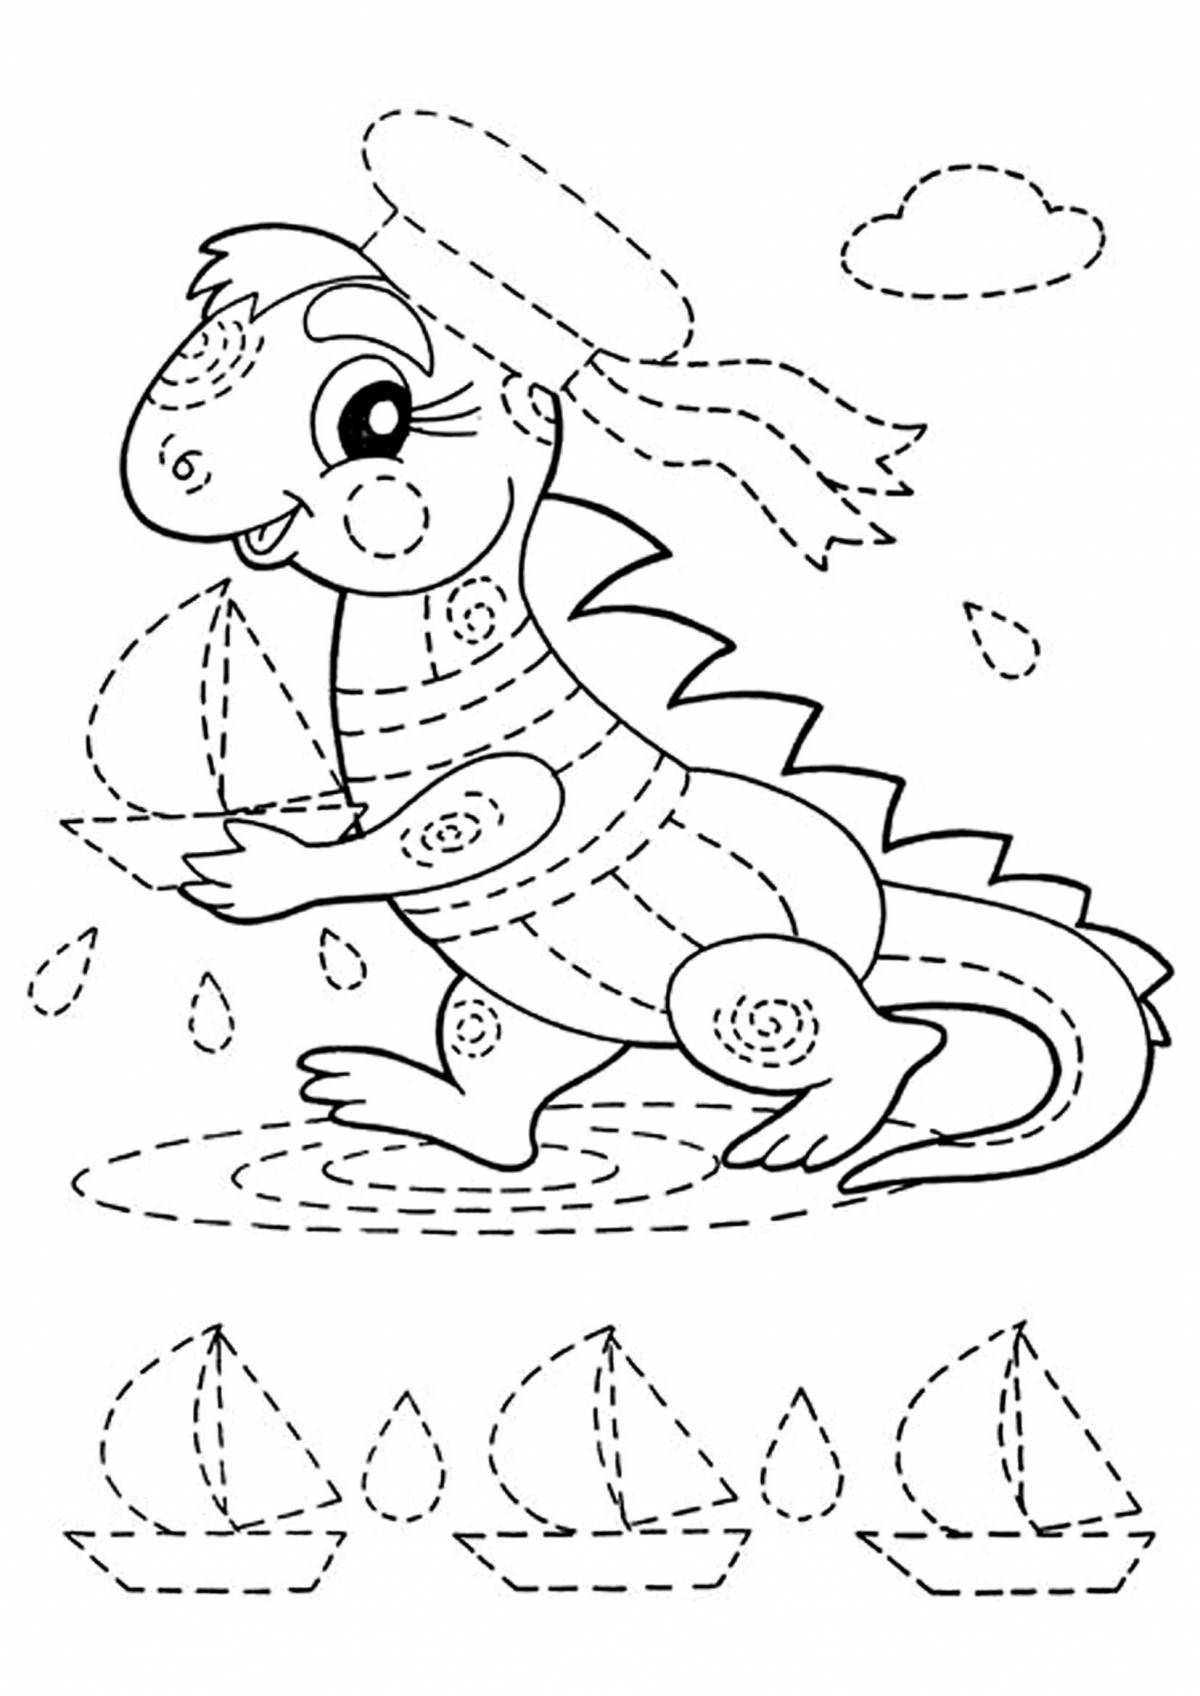 Colored coloring sheets for children 5-6 years old